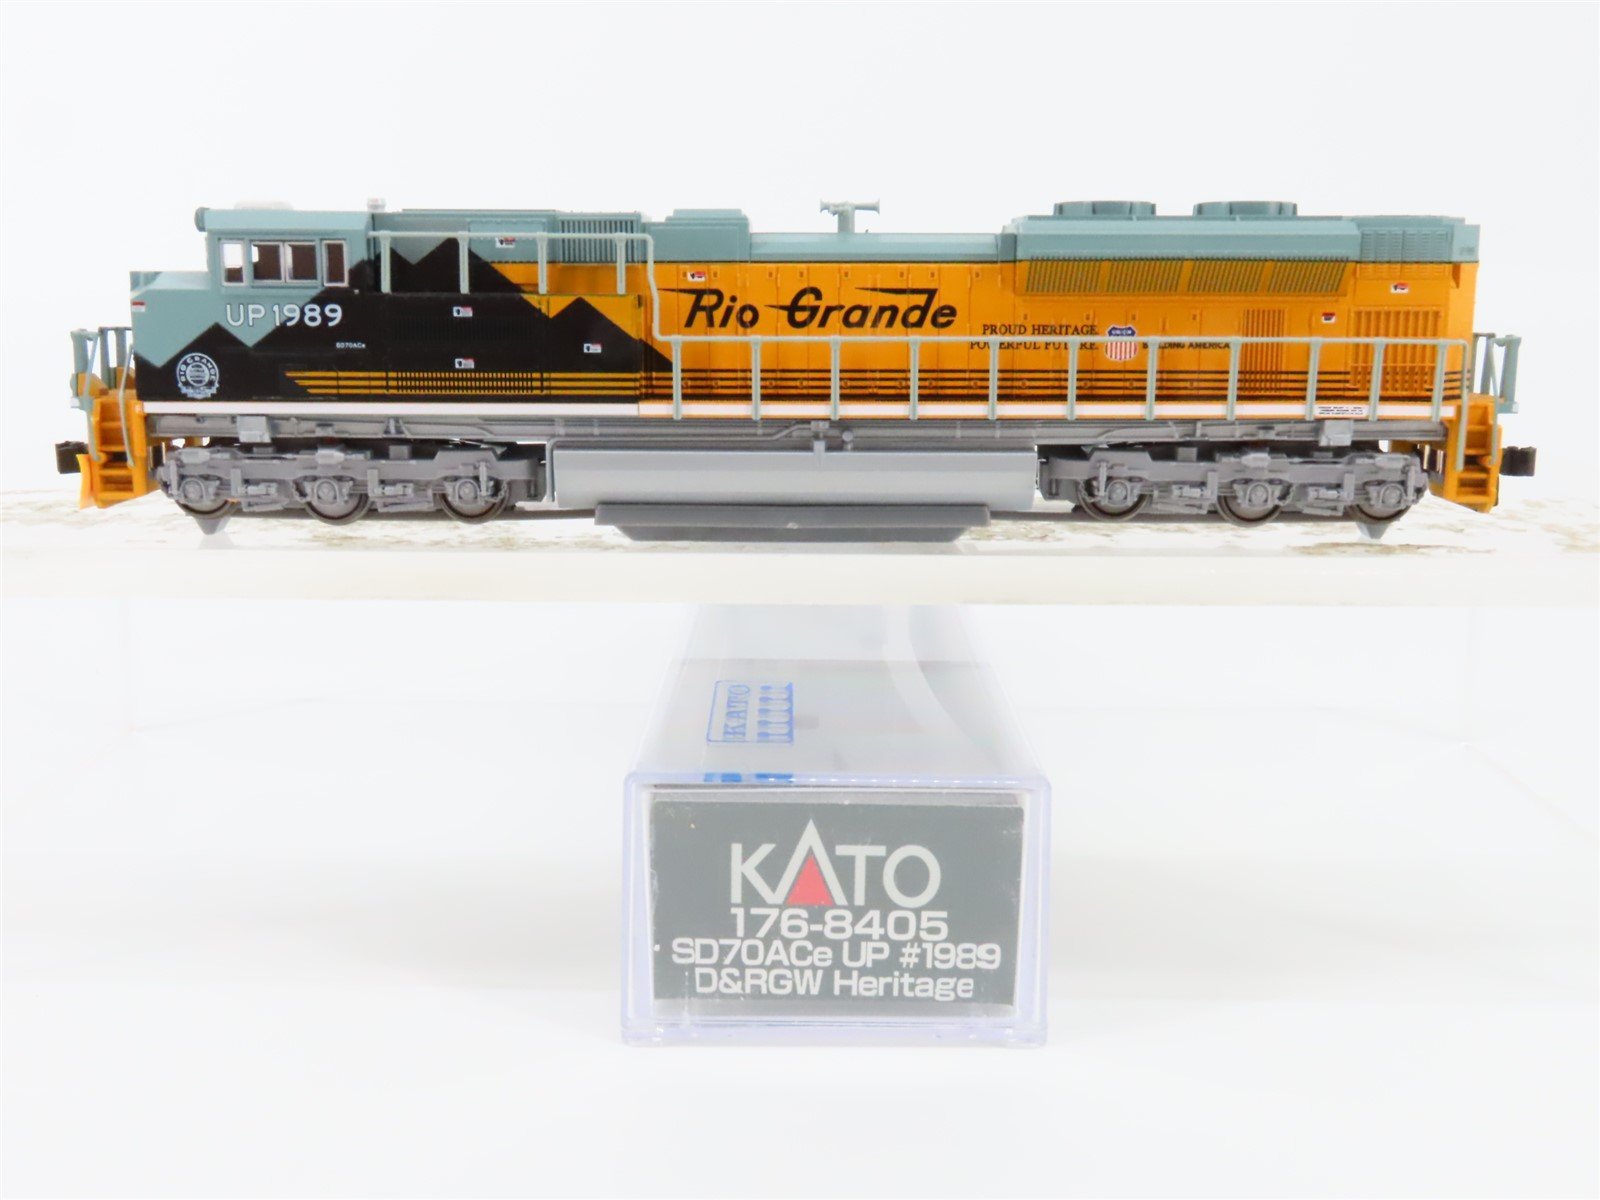 N Scale KATO 176-8405 UP "D&RGW Heritage" EMD SD70ACe Diesel #1989 w/DCC & Sound